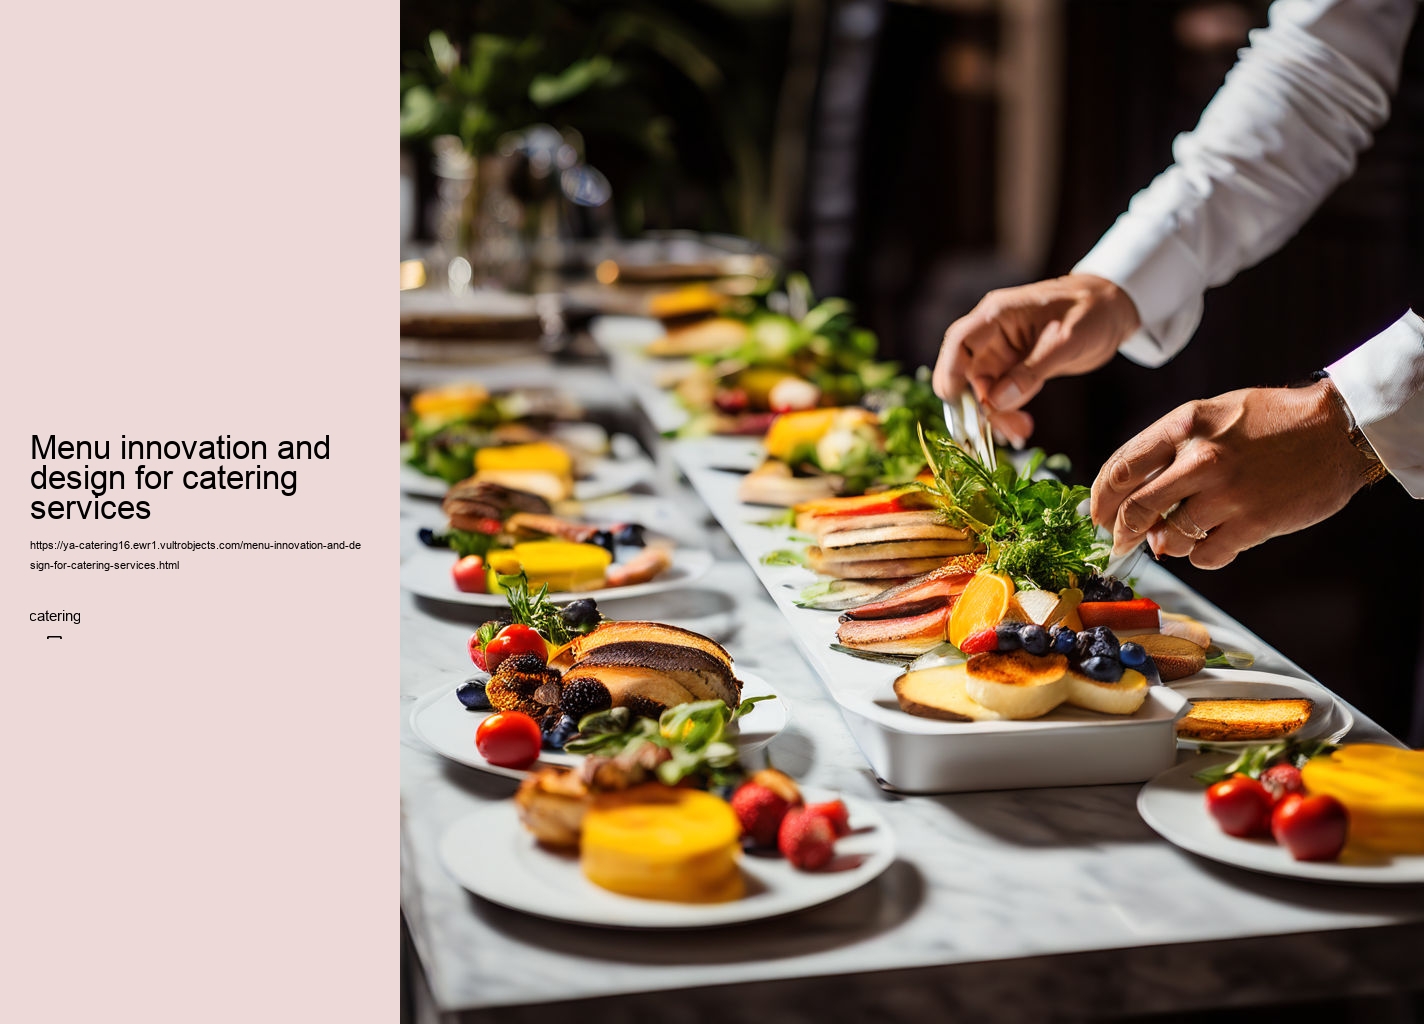 Menu innovation and design for catering services